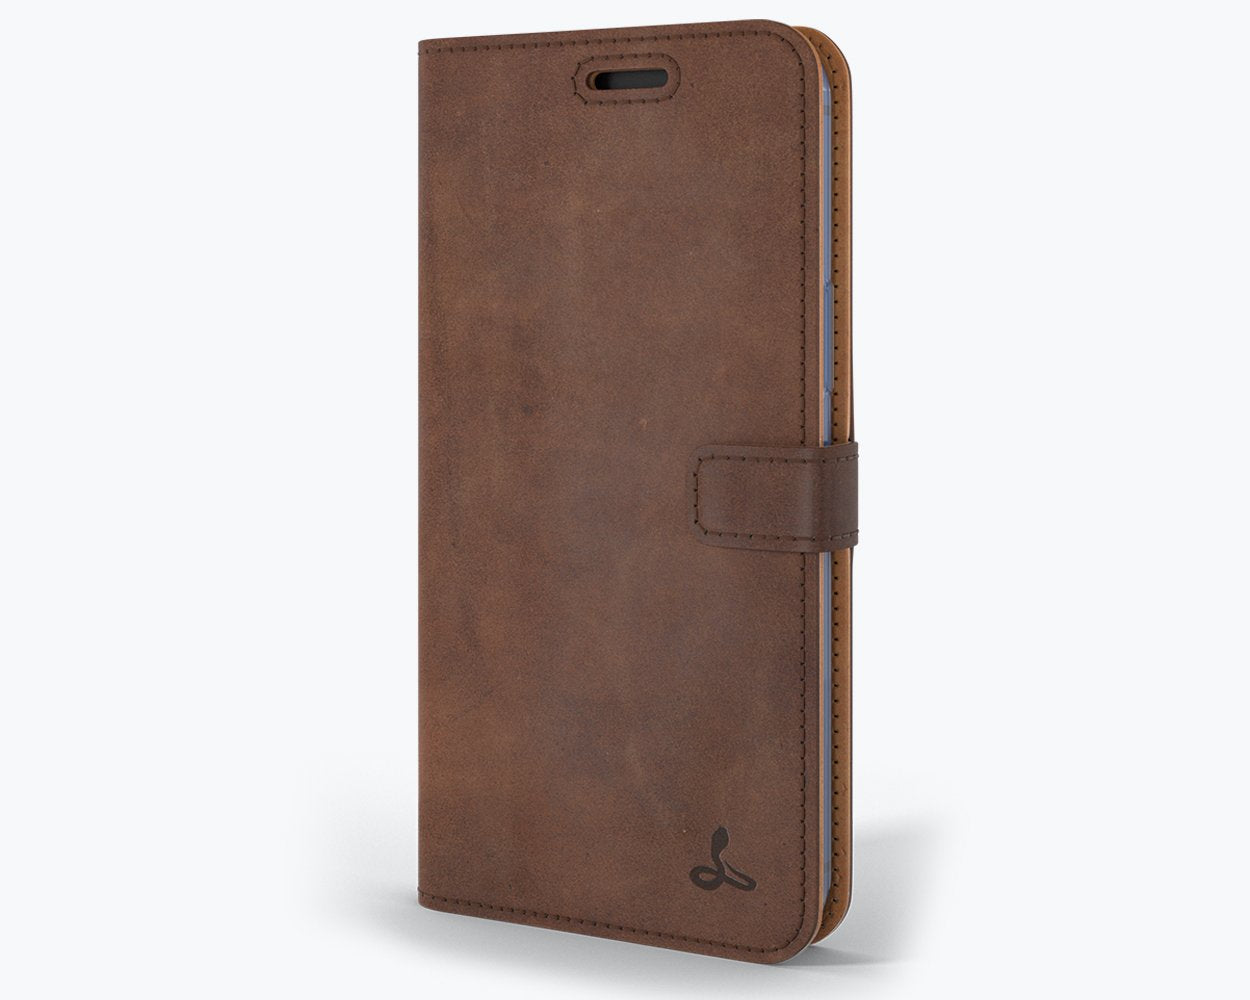 Vintage Leather Wallet - Apple iPhone 12 Pro Max